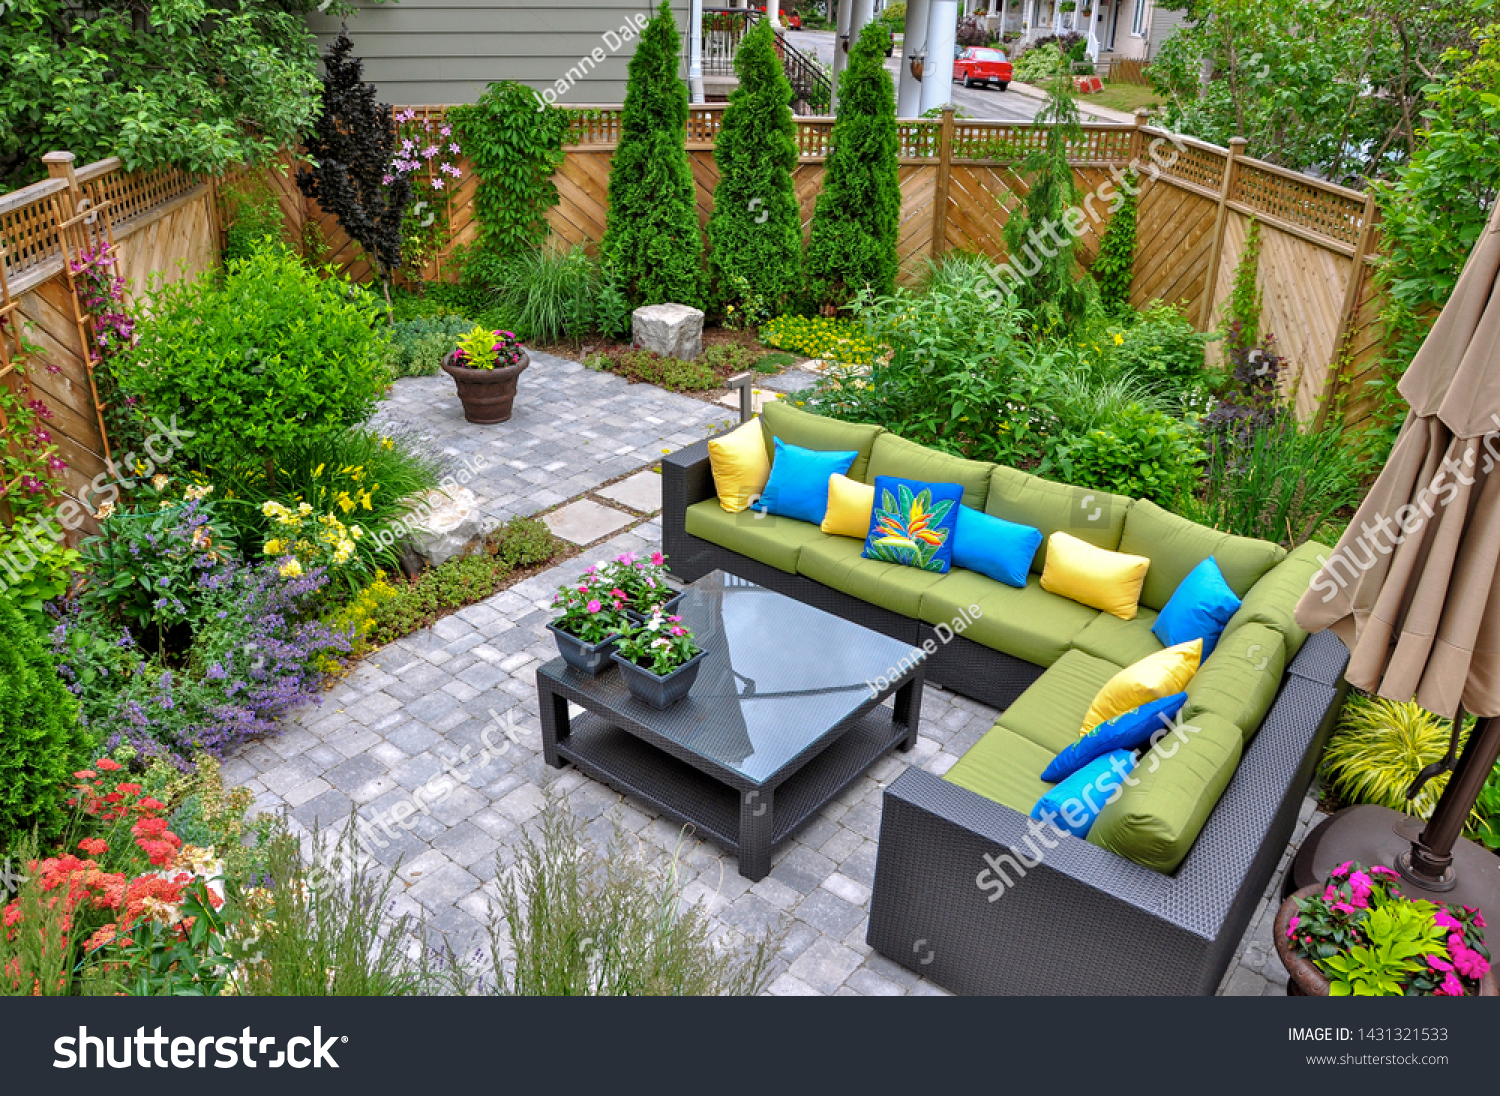 A beautiful small, urban backyard garden featuring a tumbled paver patio, flagstone stepping stones, and a variety of trees, shrubs and perennials add colour and year round interest. #1431321533